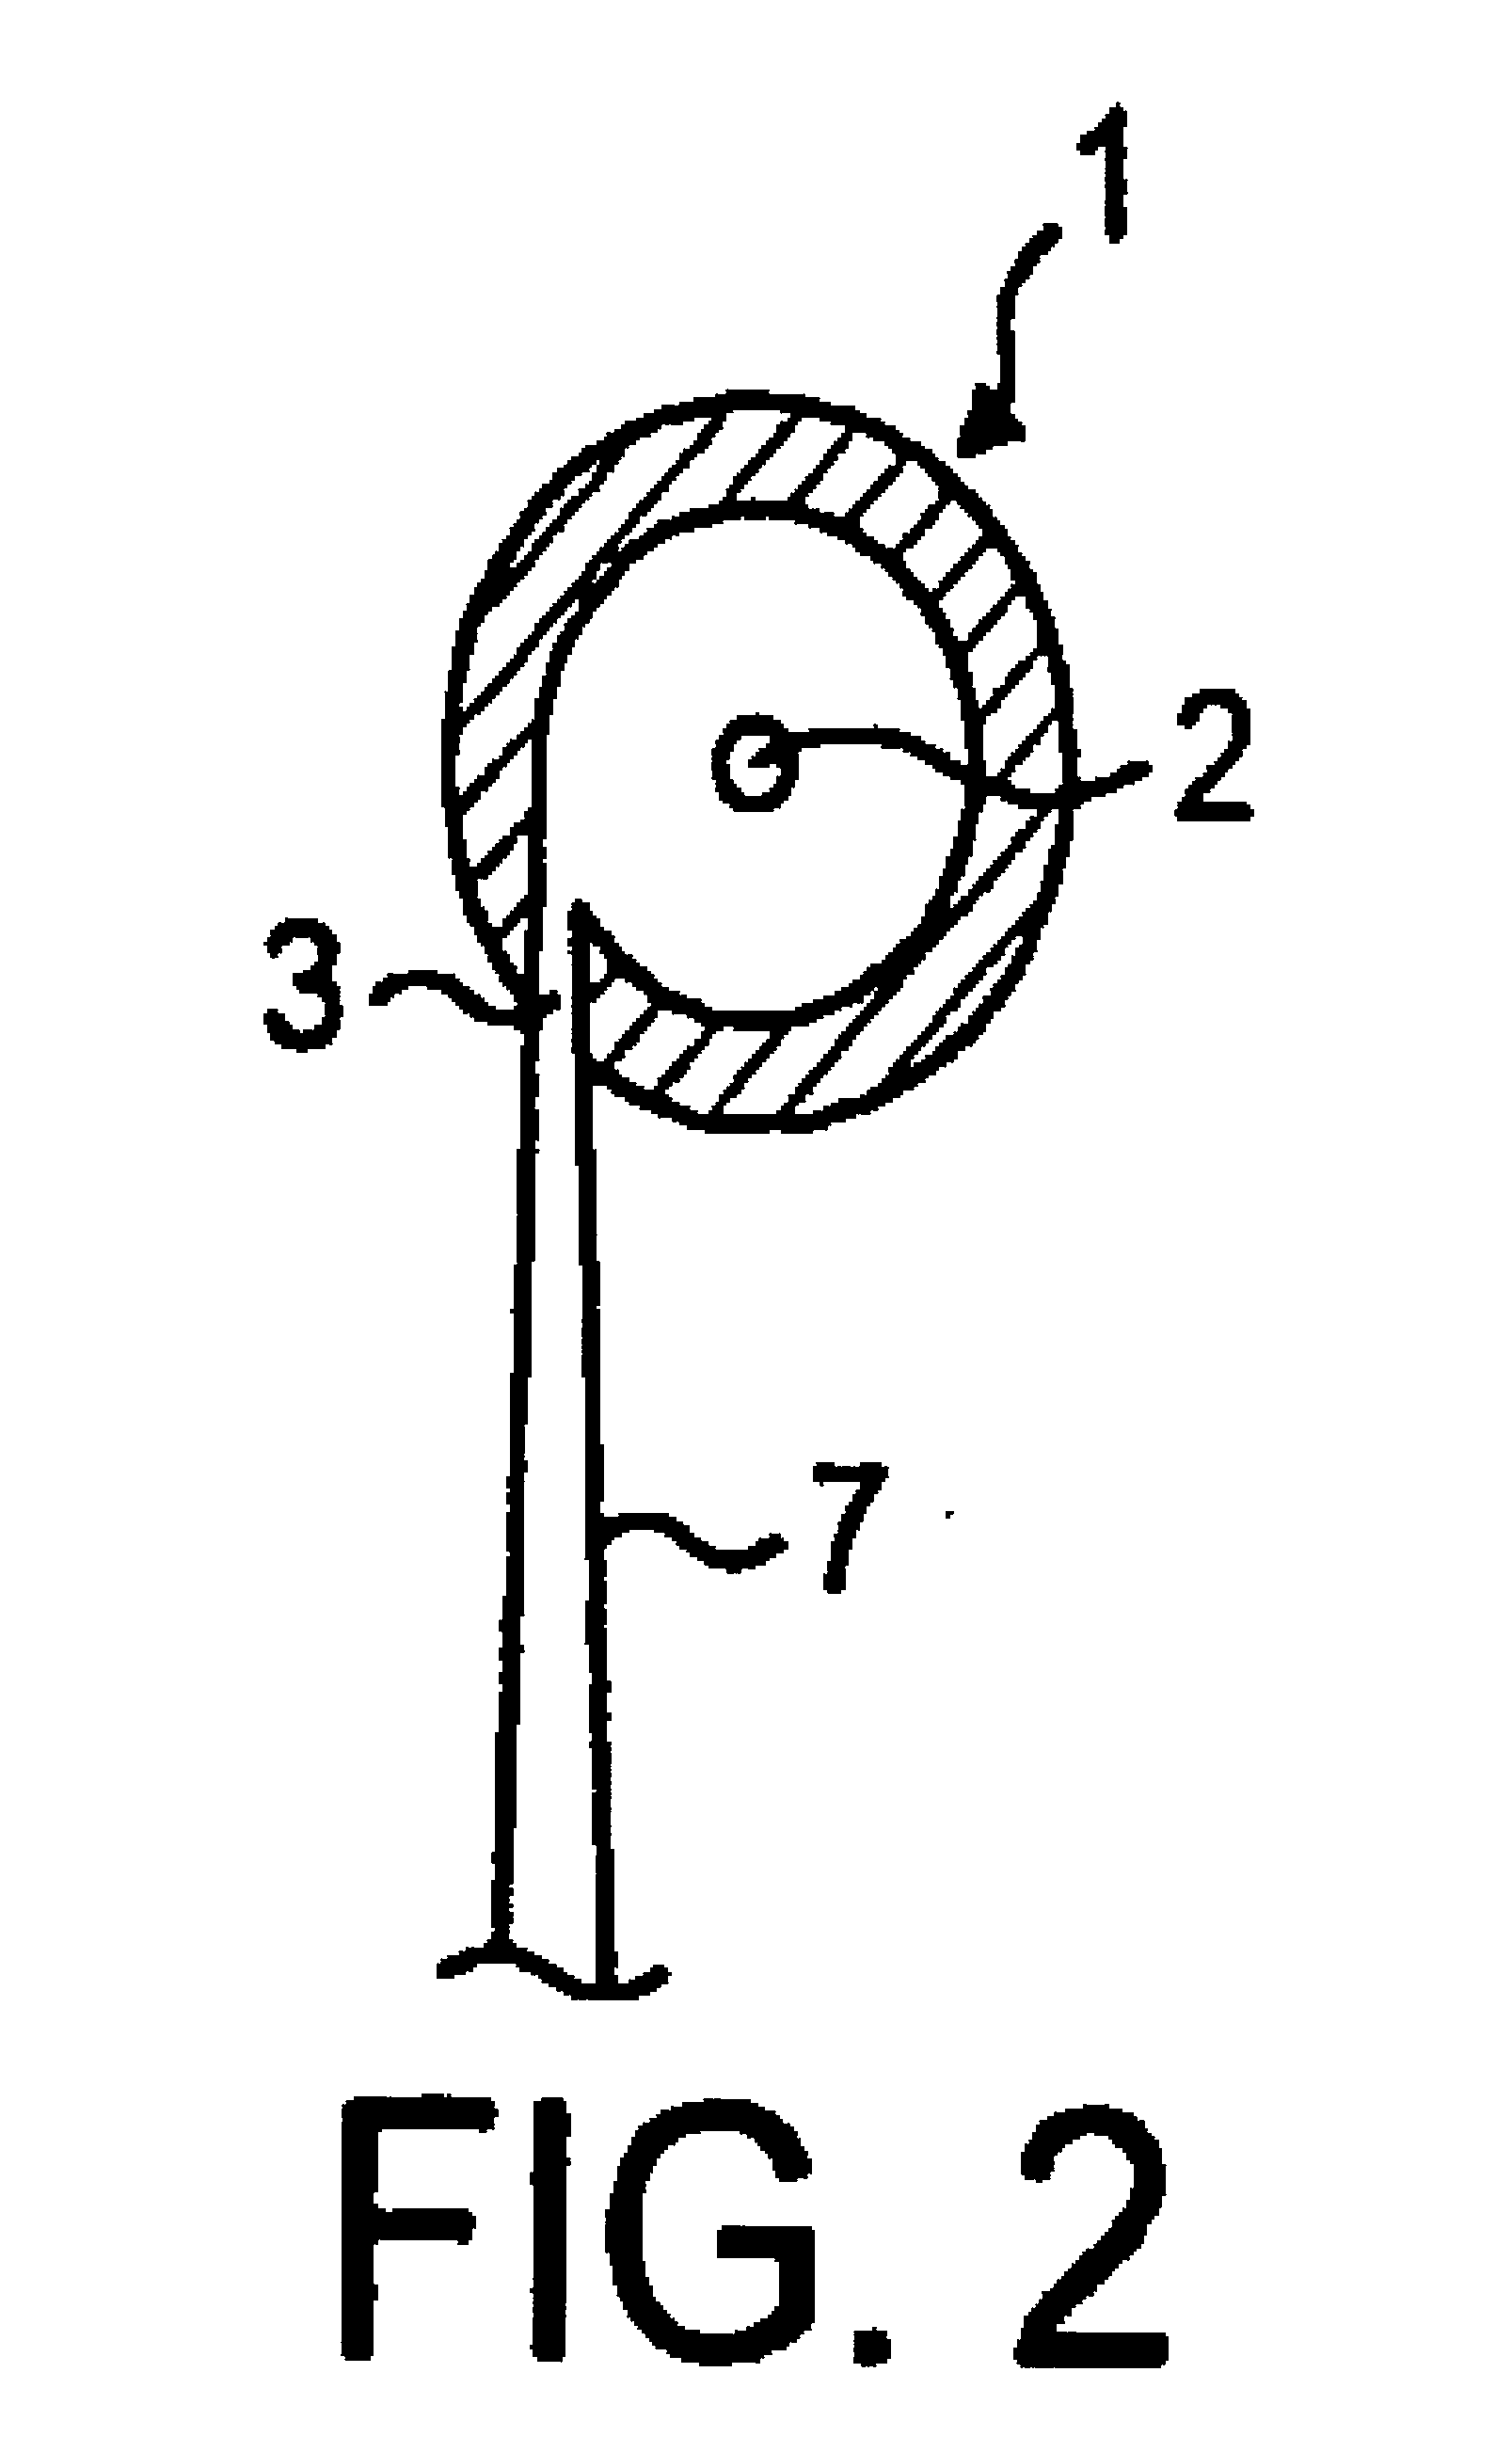 Composition, device, and method for treating sexual dysfunction via inhalation